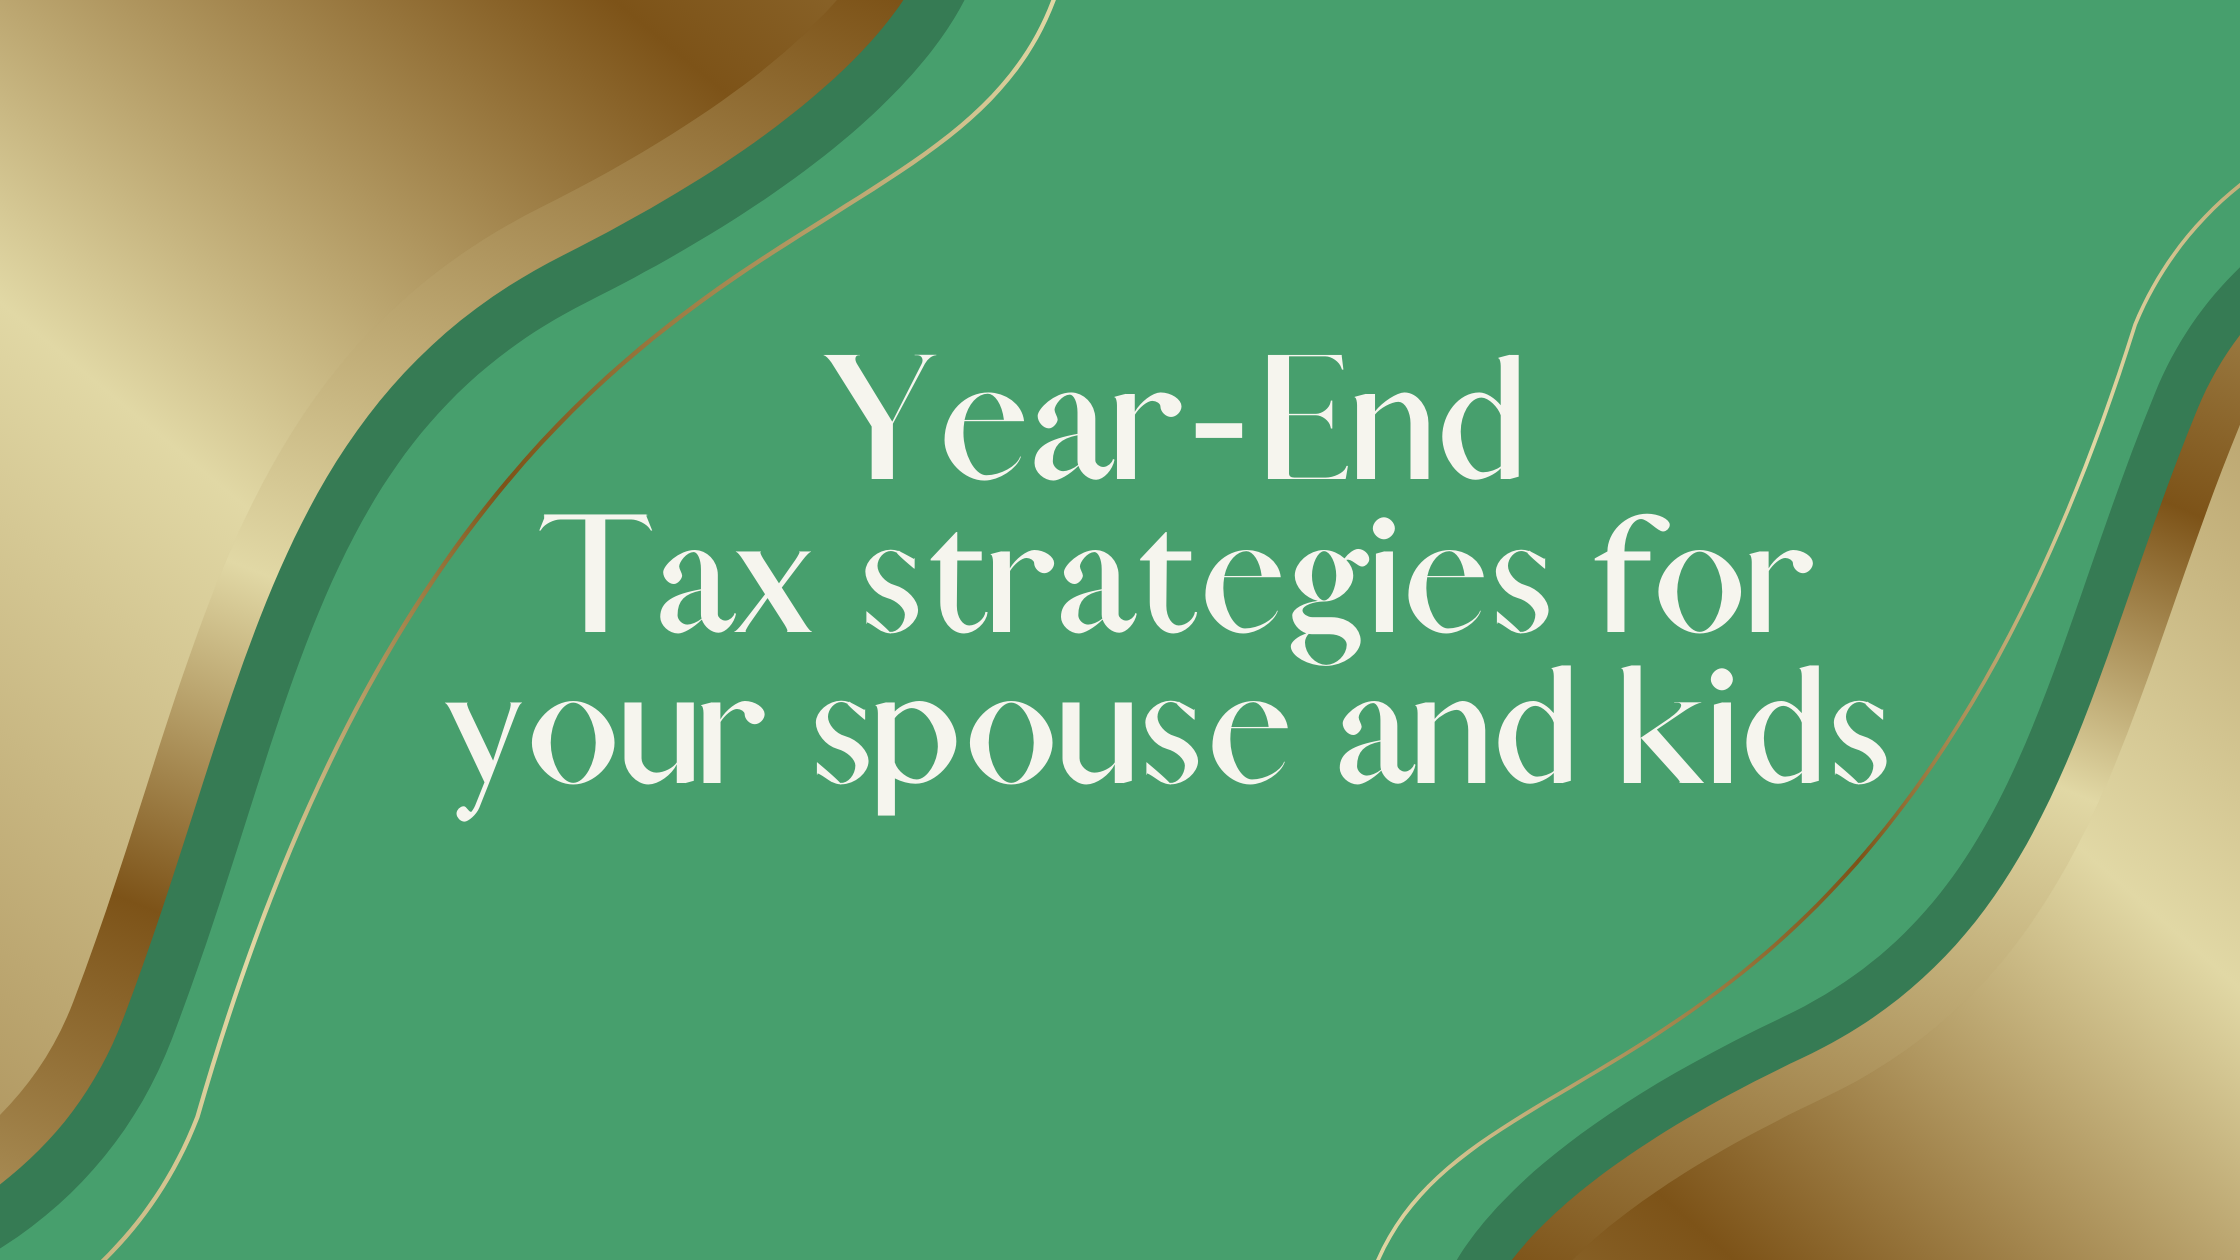 11th hour series- Tax strategies for the spouse and kids